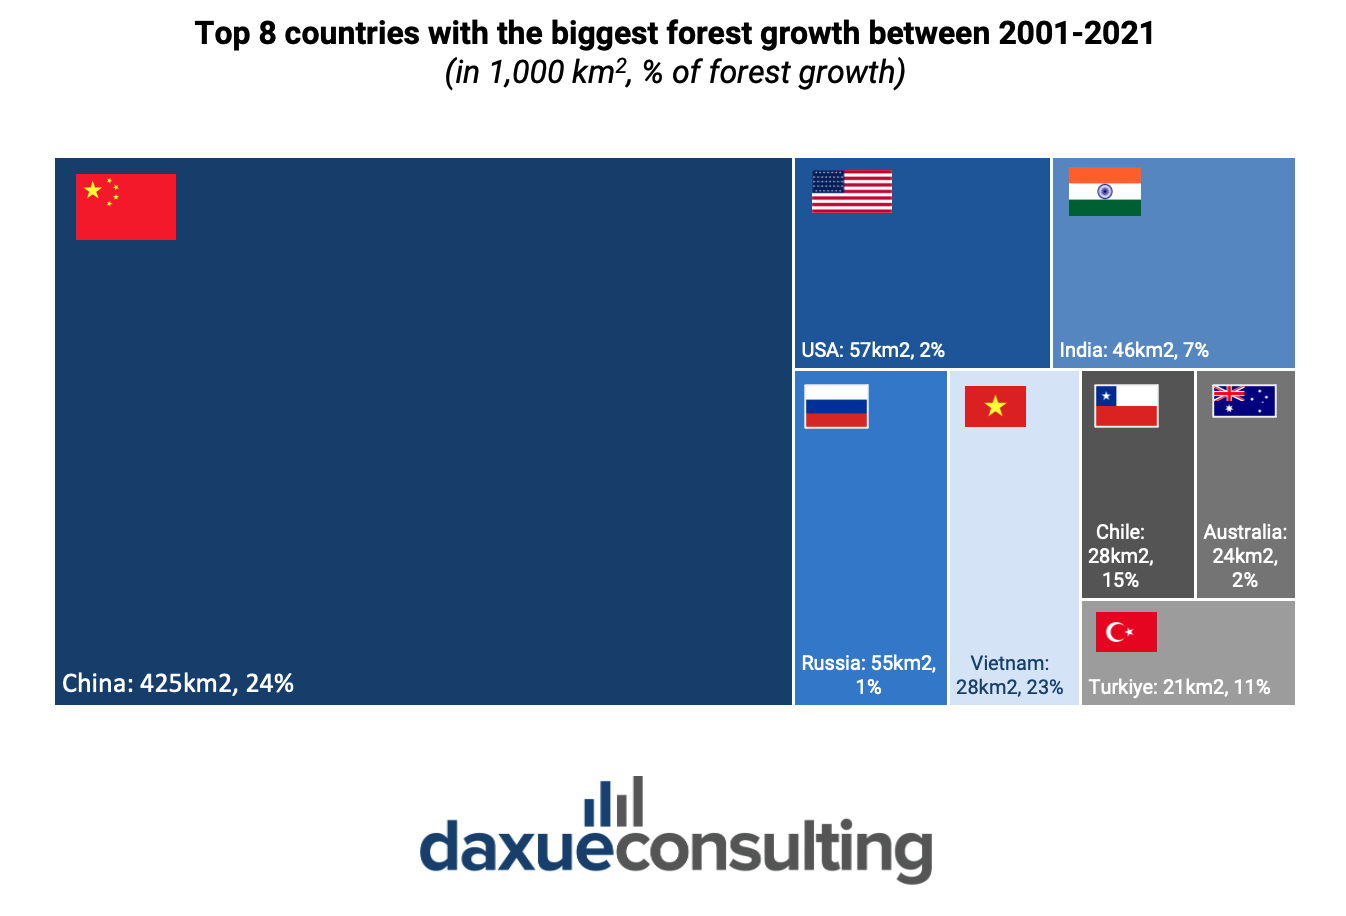 China's reforestation efforts: Top 8 countries with the biggest forest growth between 2001 and 2021